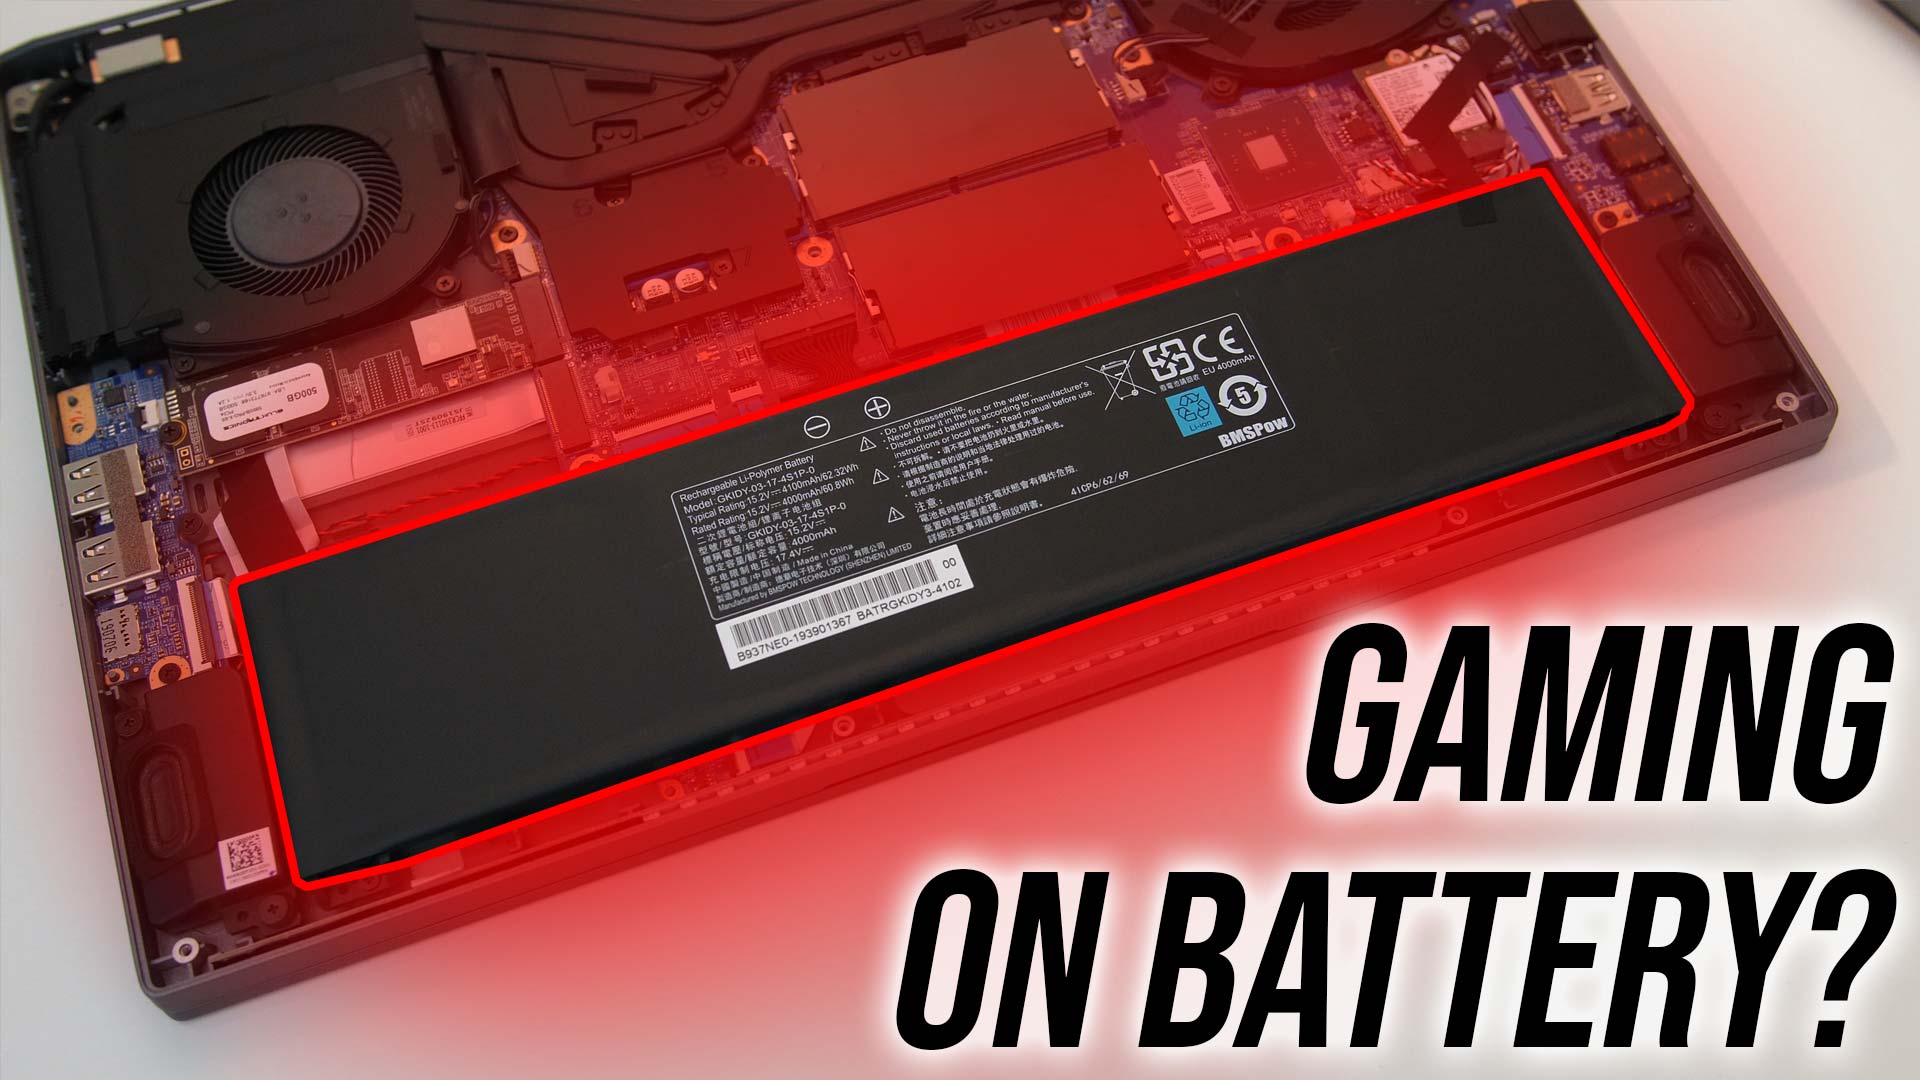 Why Games On Laptop Battery Power Is Bad